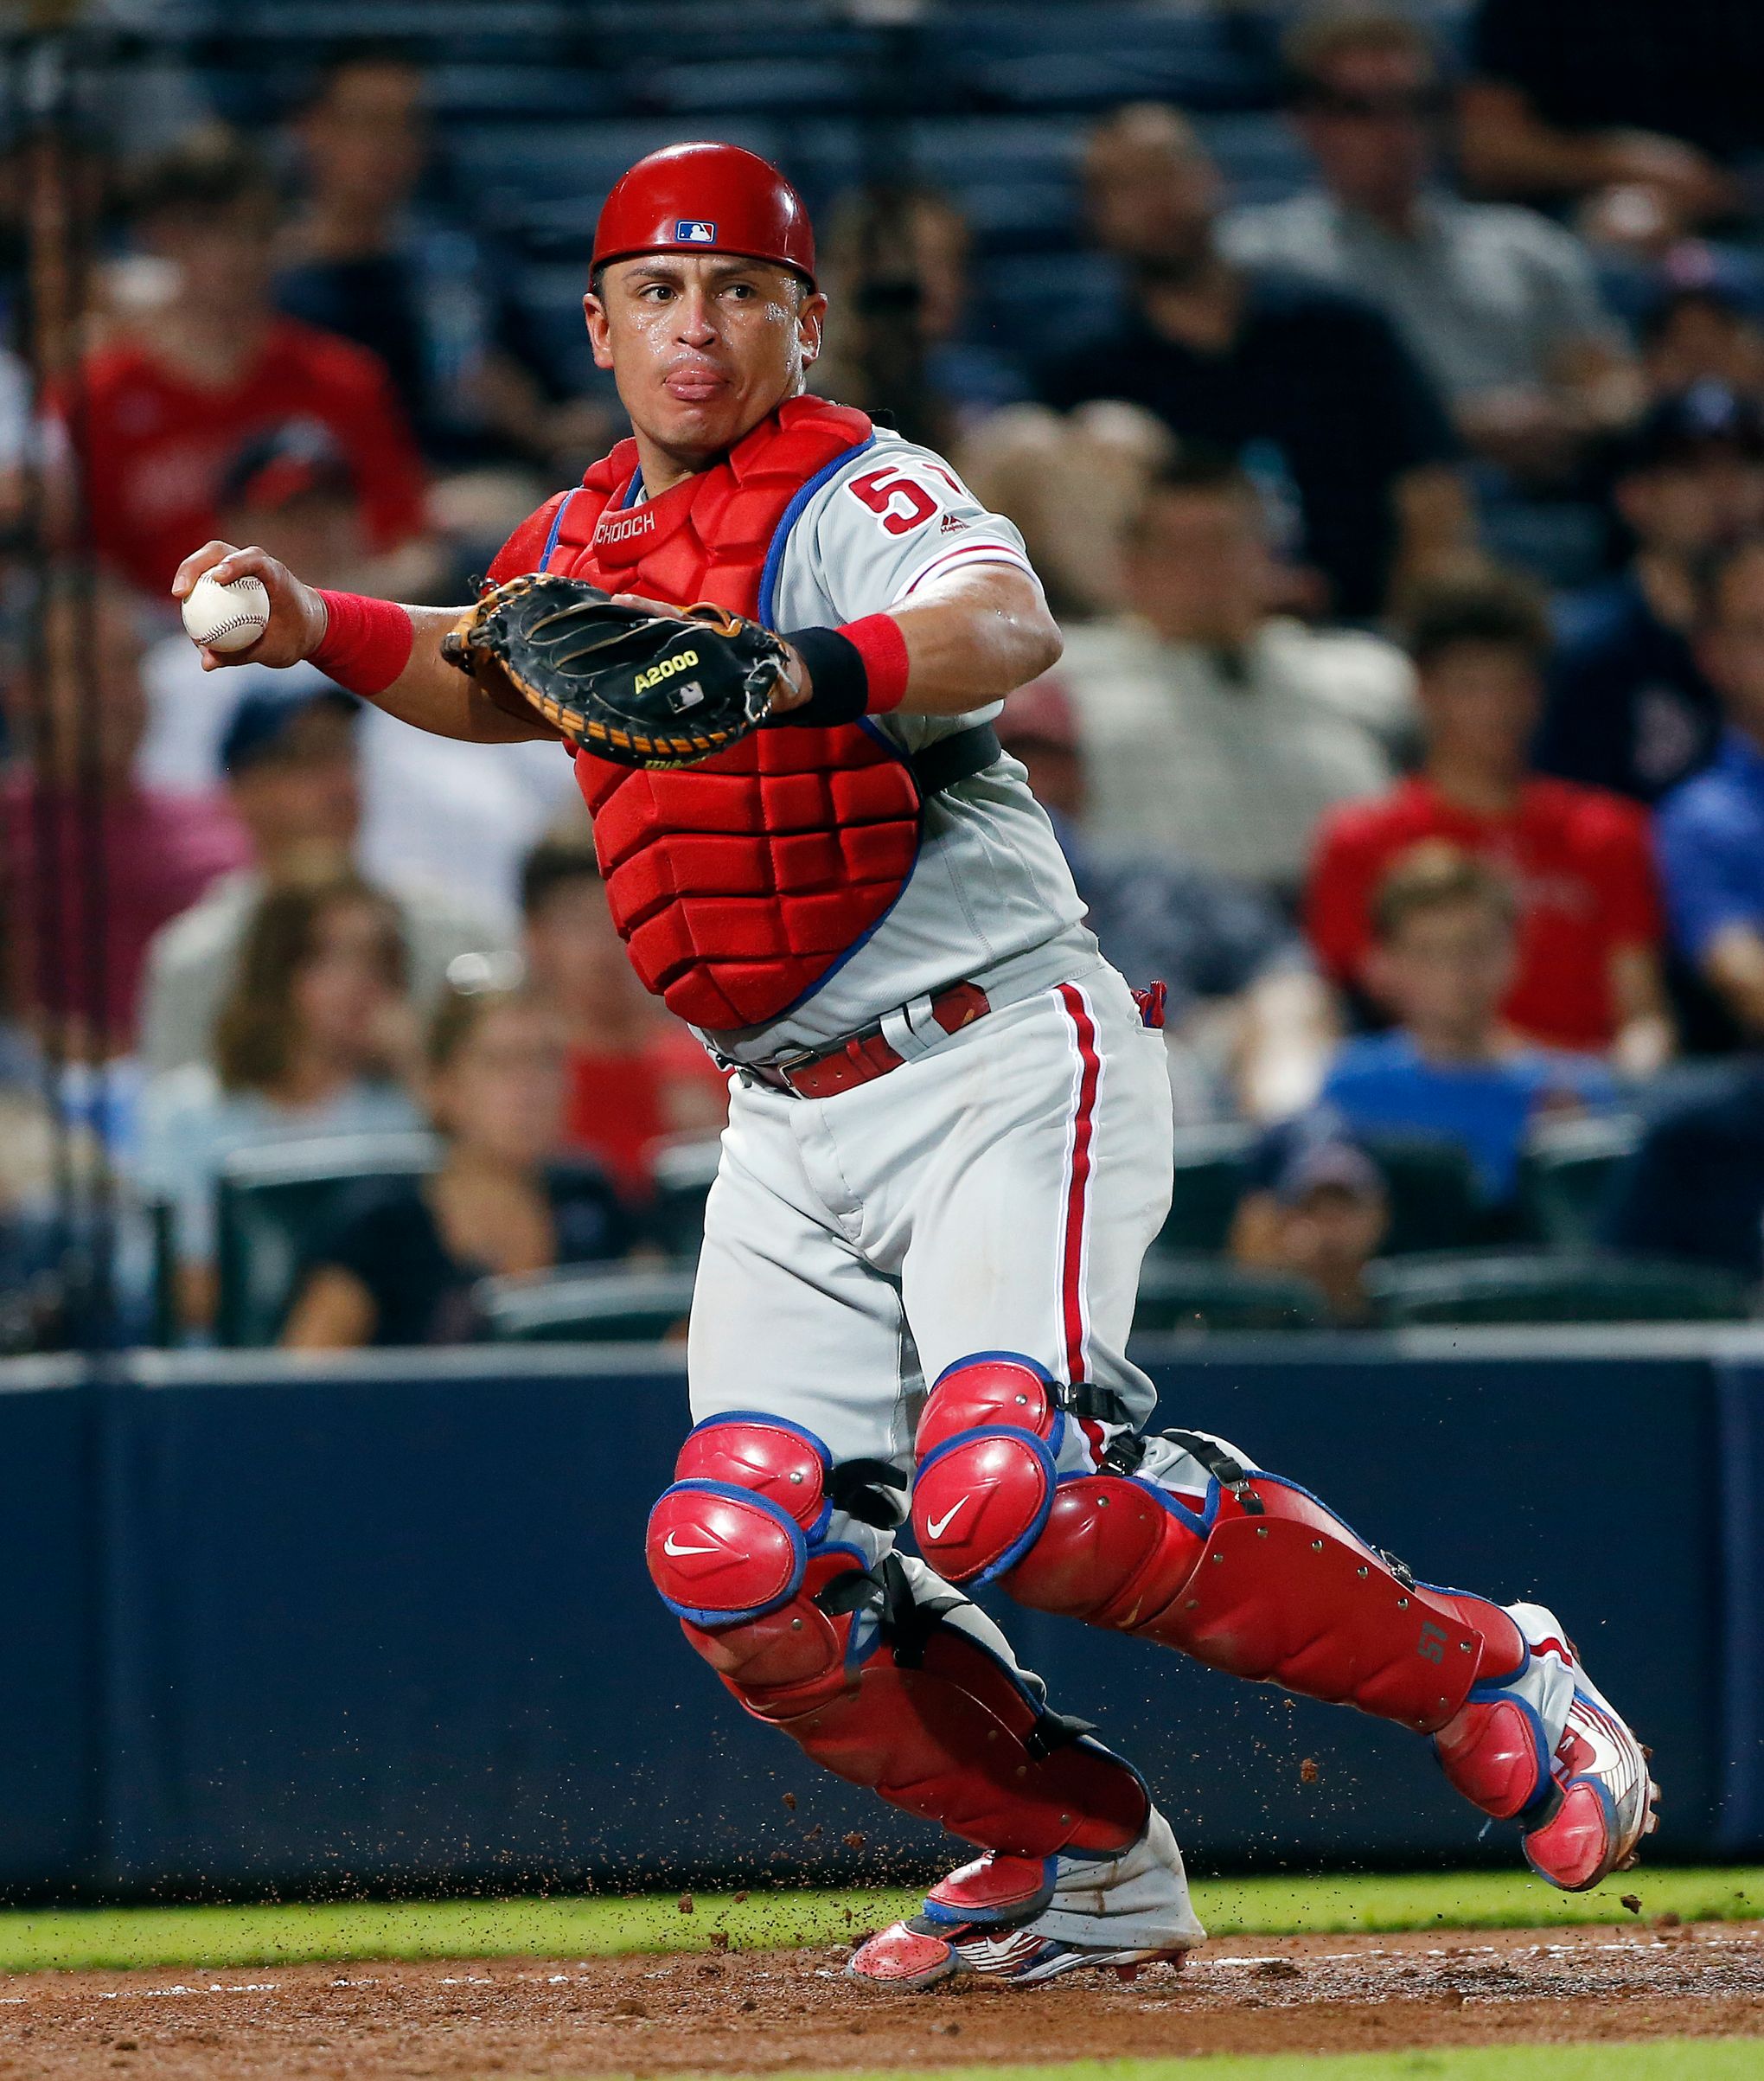 Phillies catcher Carlos Ruiz on Thursday May 22nd at Minute Maid